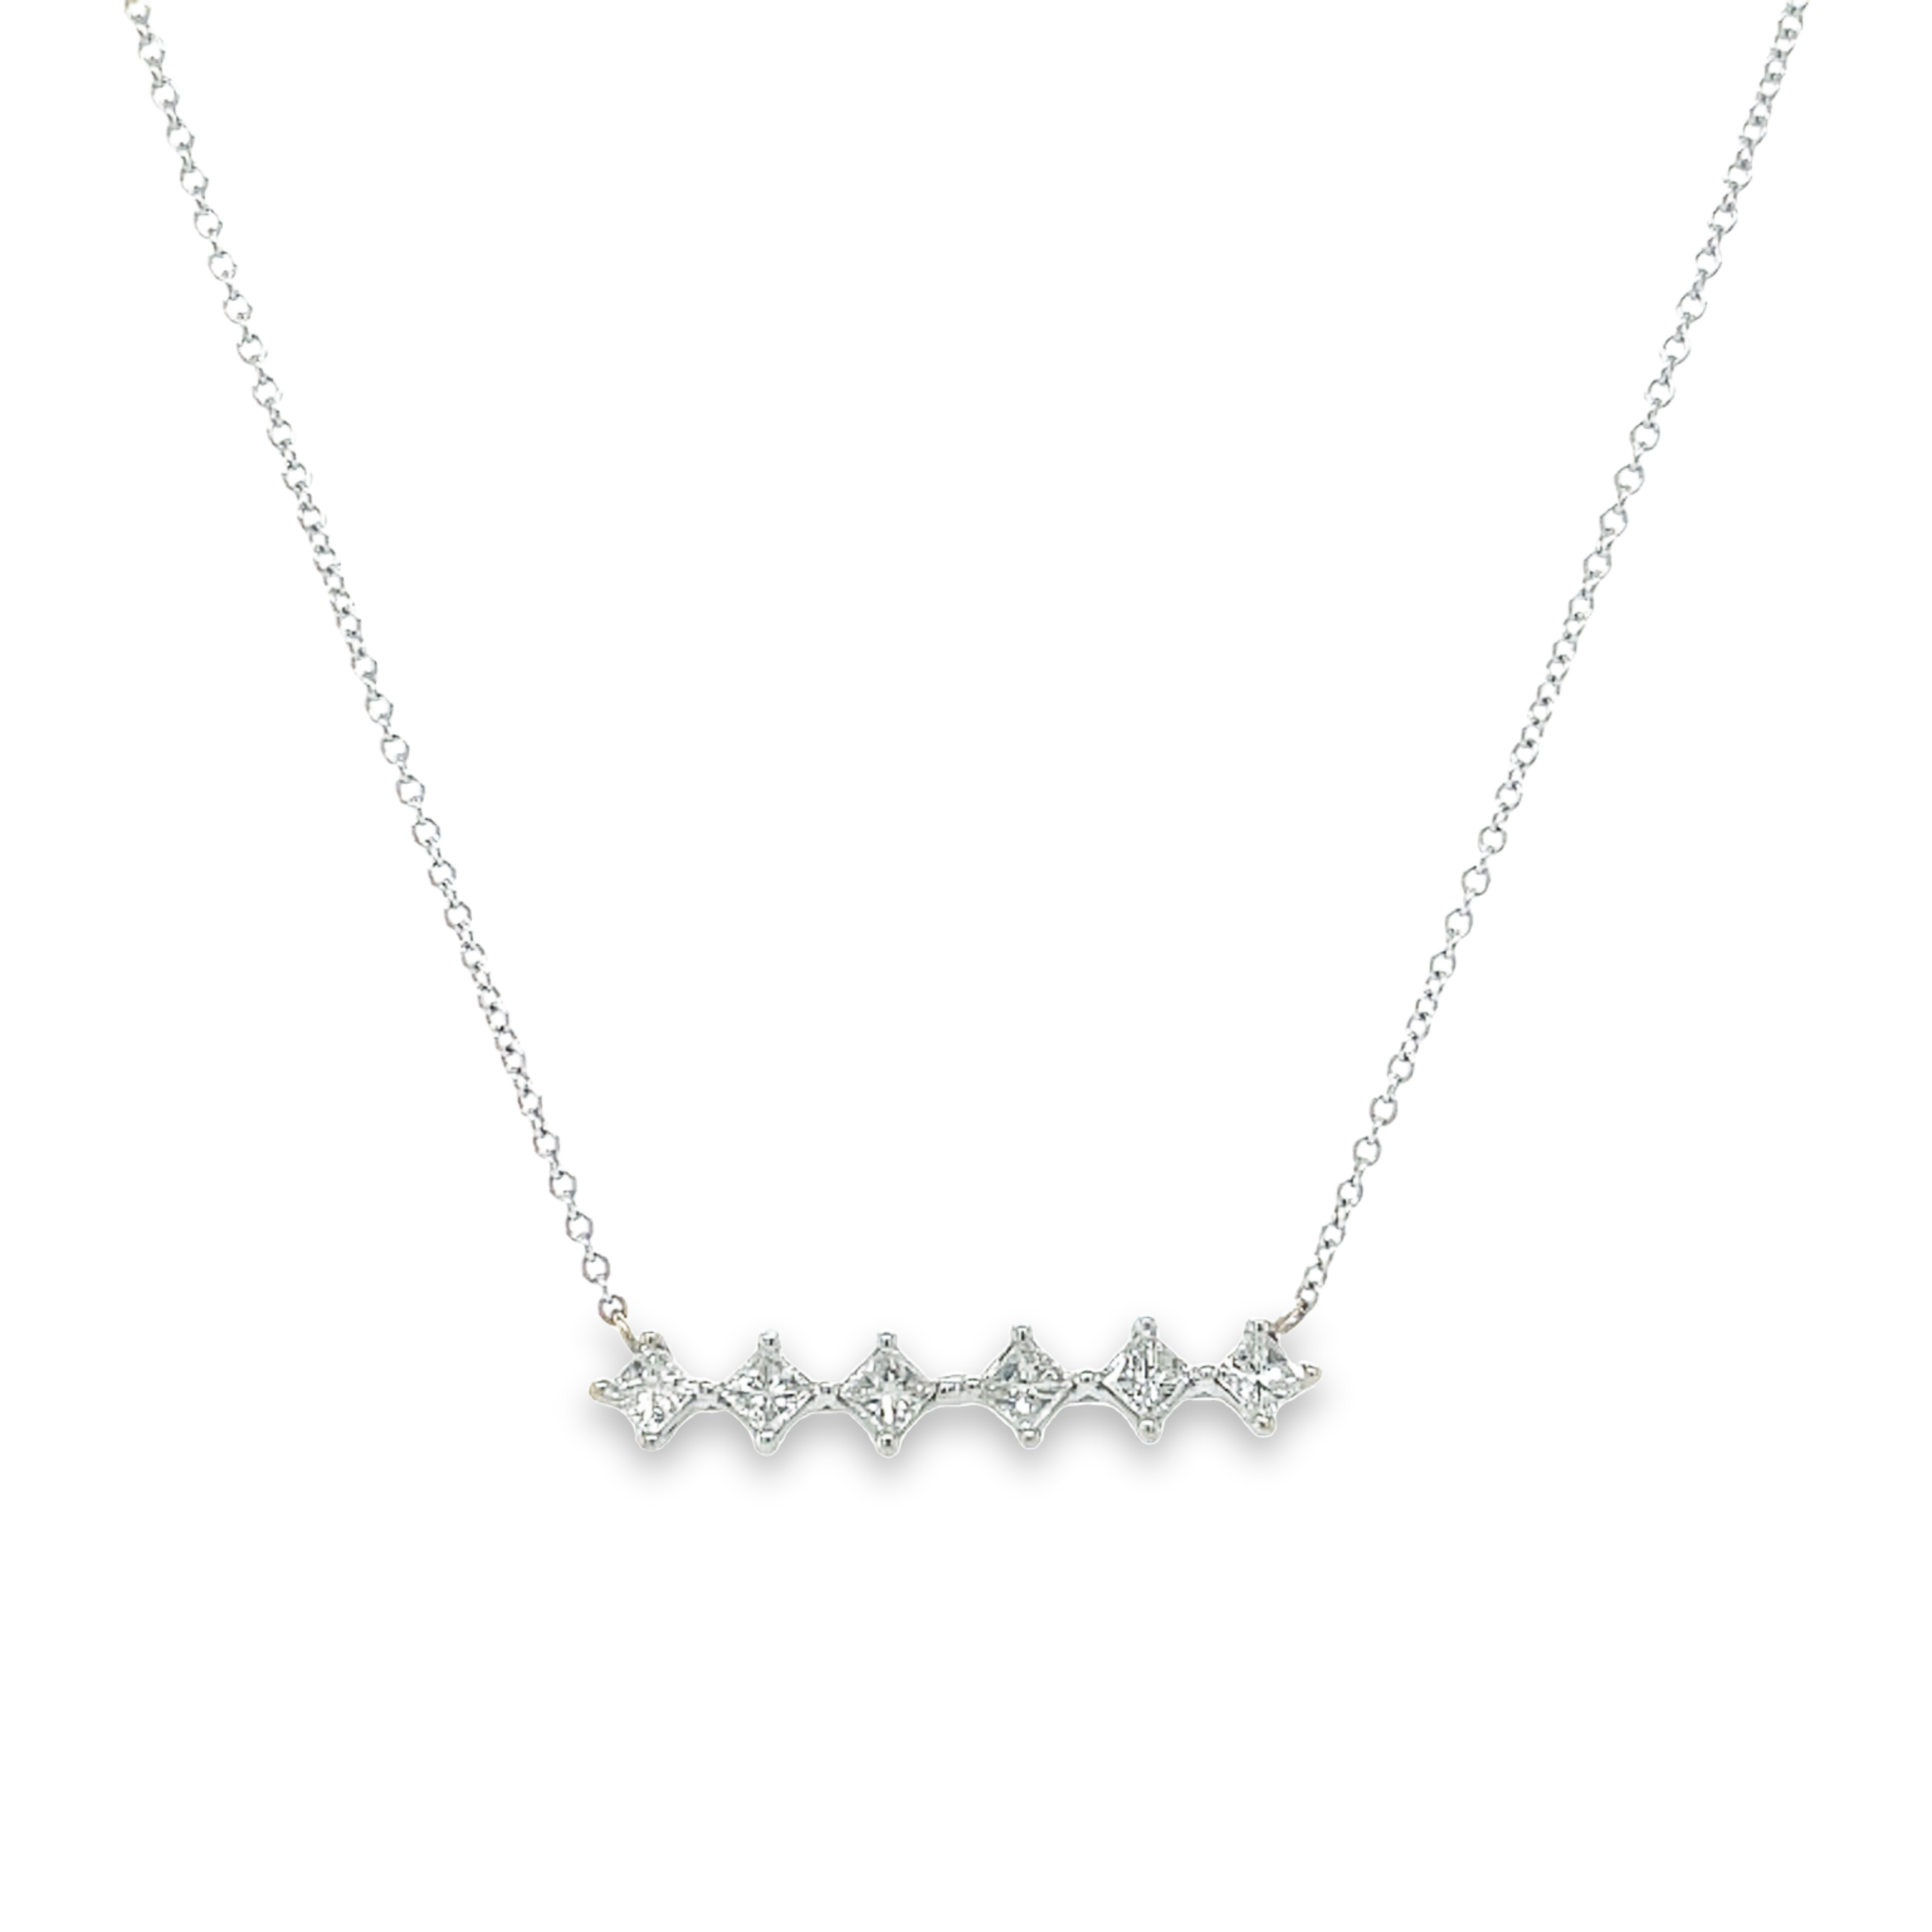 Six sparkling round diamonds, 0.60 cts, prong-set in 14k white gold, create a magnificent necklace, 18" long. A treasure that will be cherished for a lifetime!